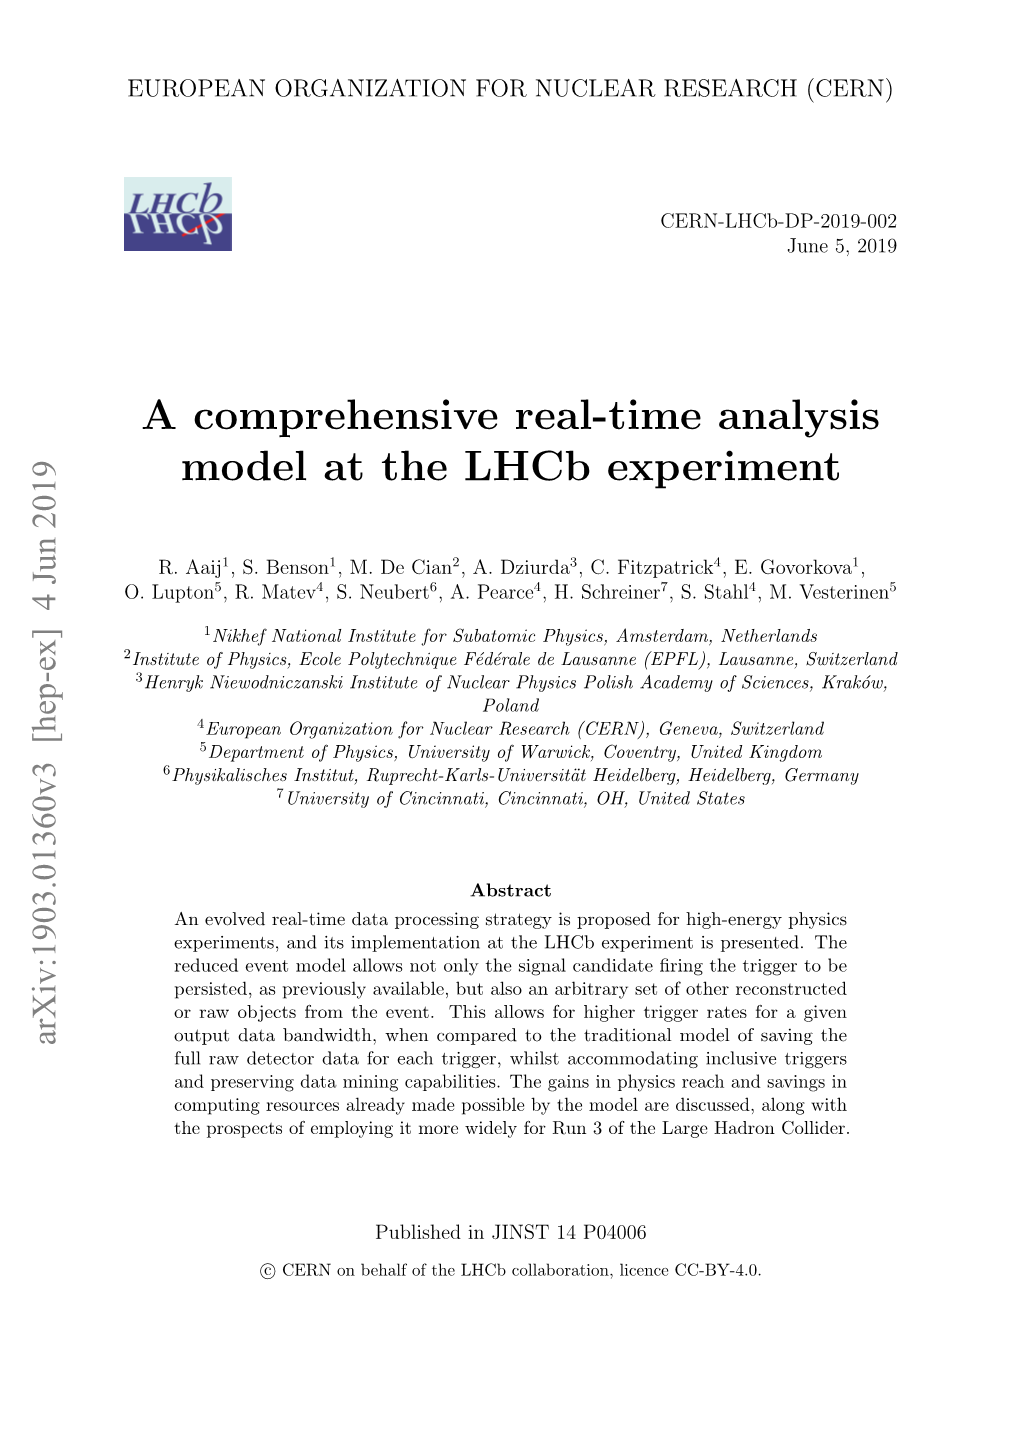 A Comprehensive Real-Time Analysis Model at the Lhcb Experiment